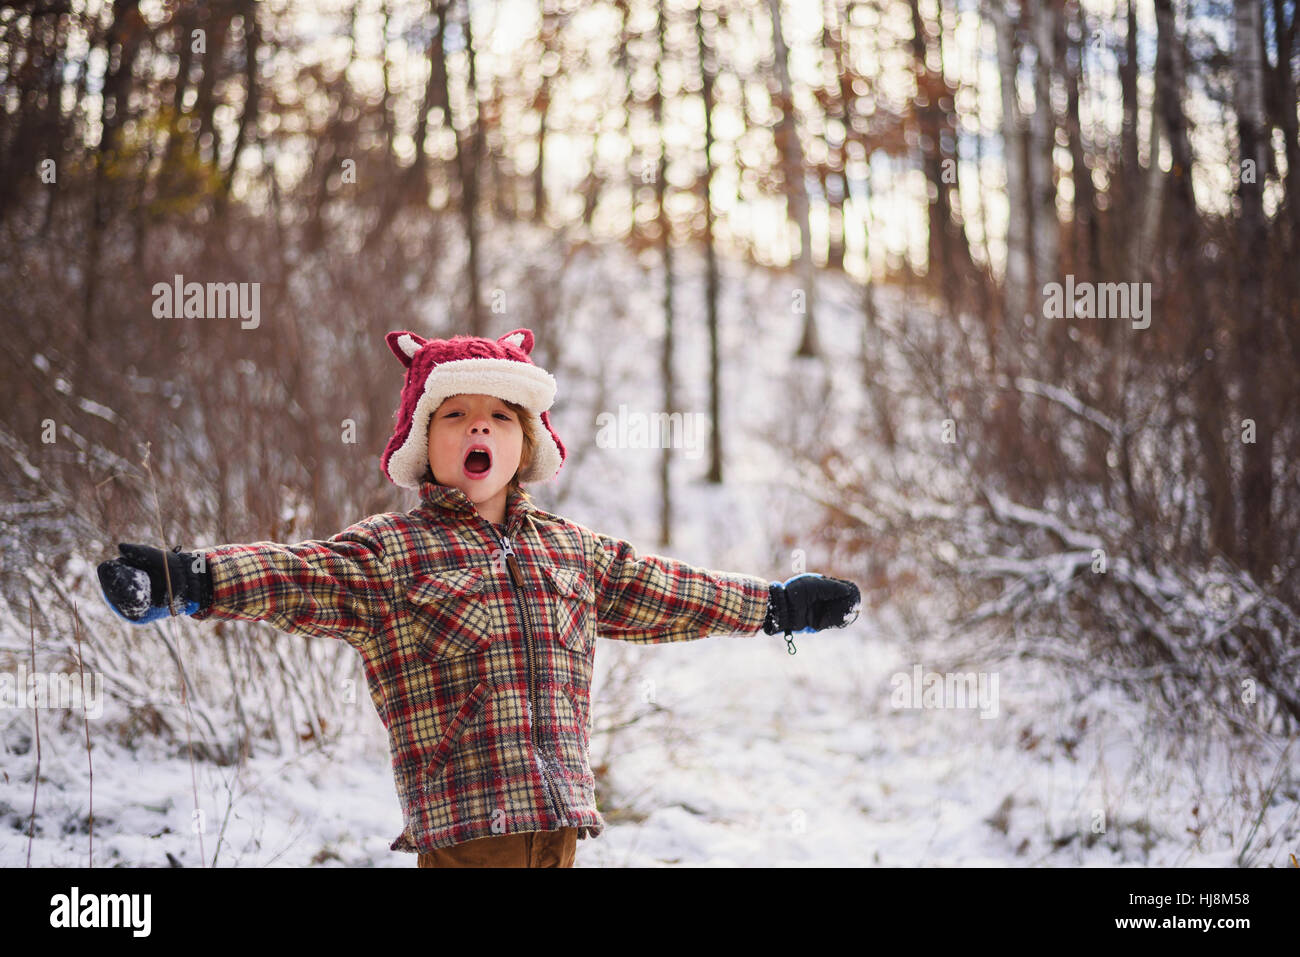 Portrait of a boy standing in snow with outstretched arms Stock Photo